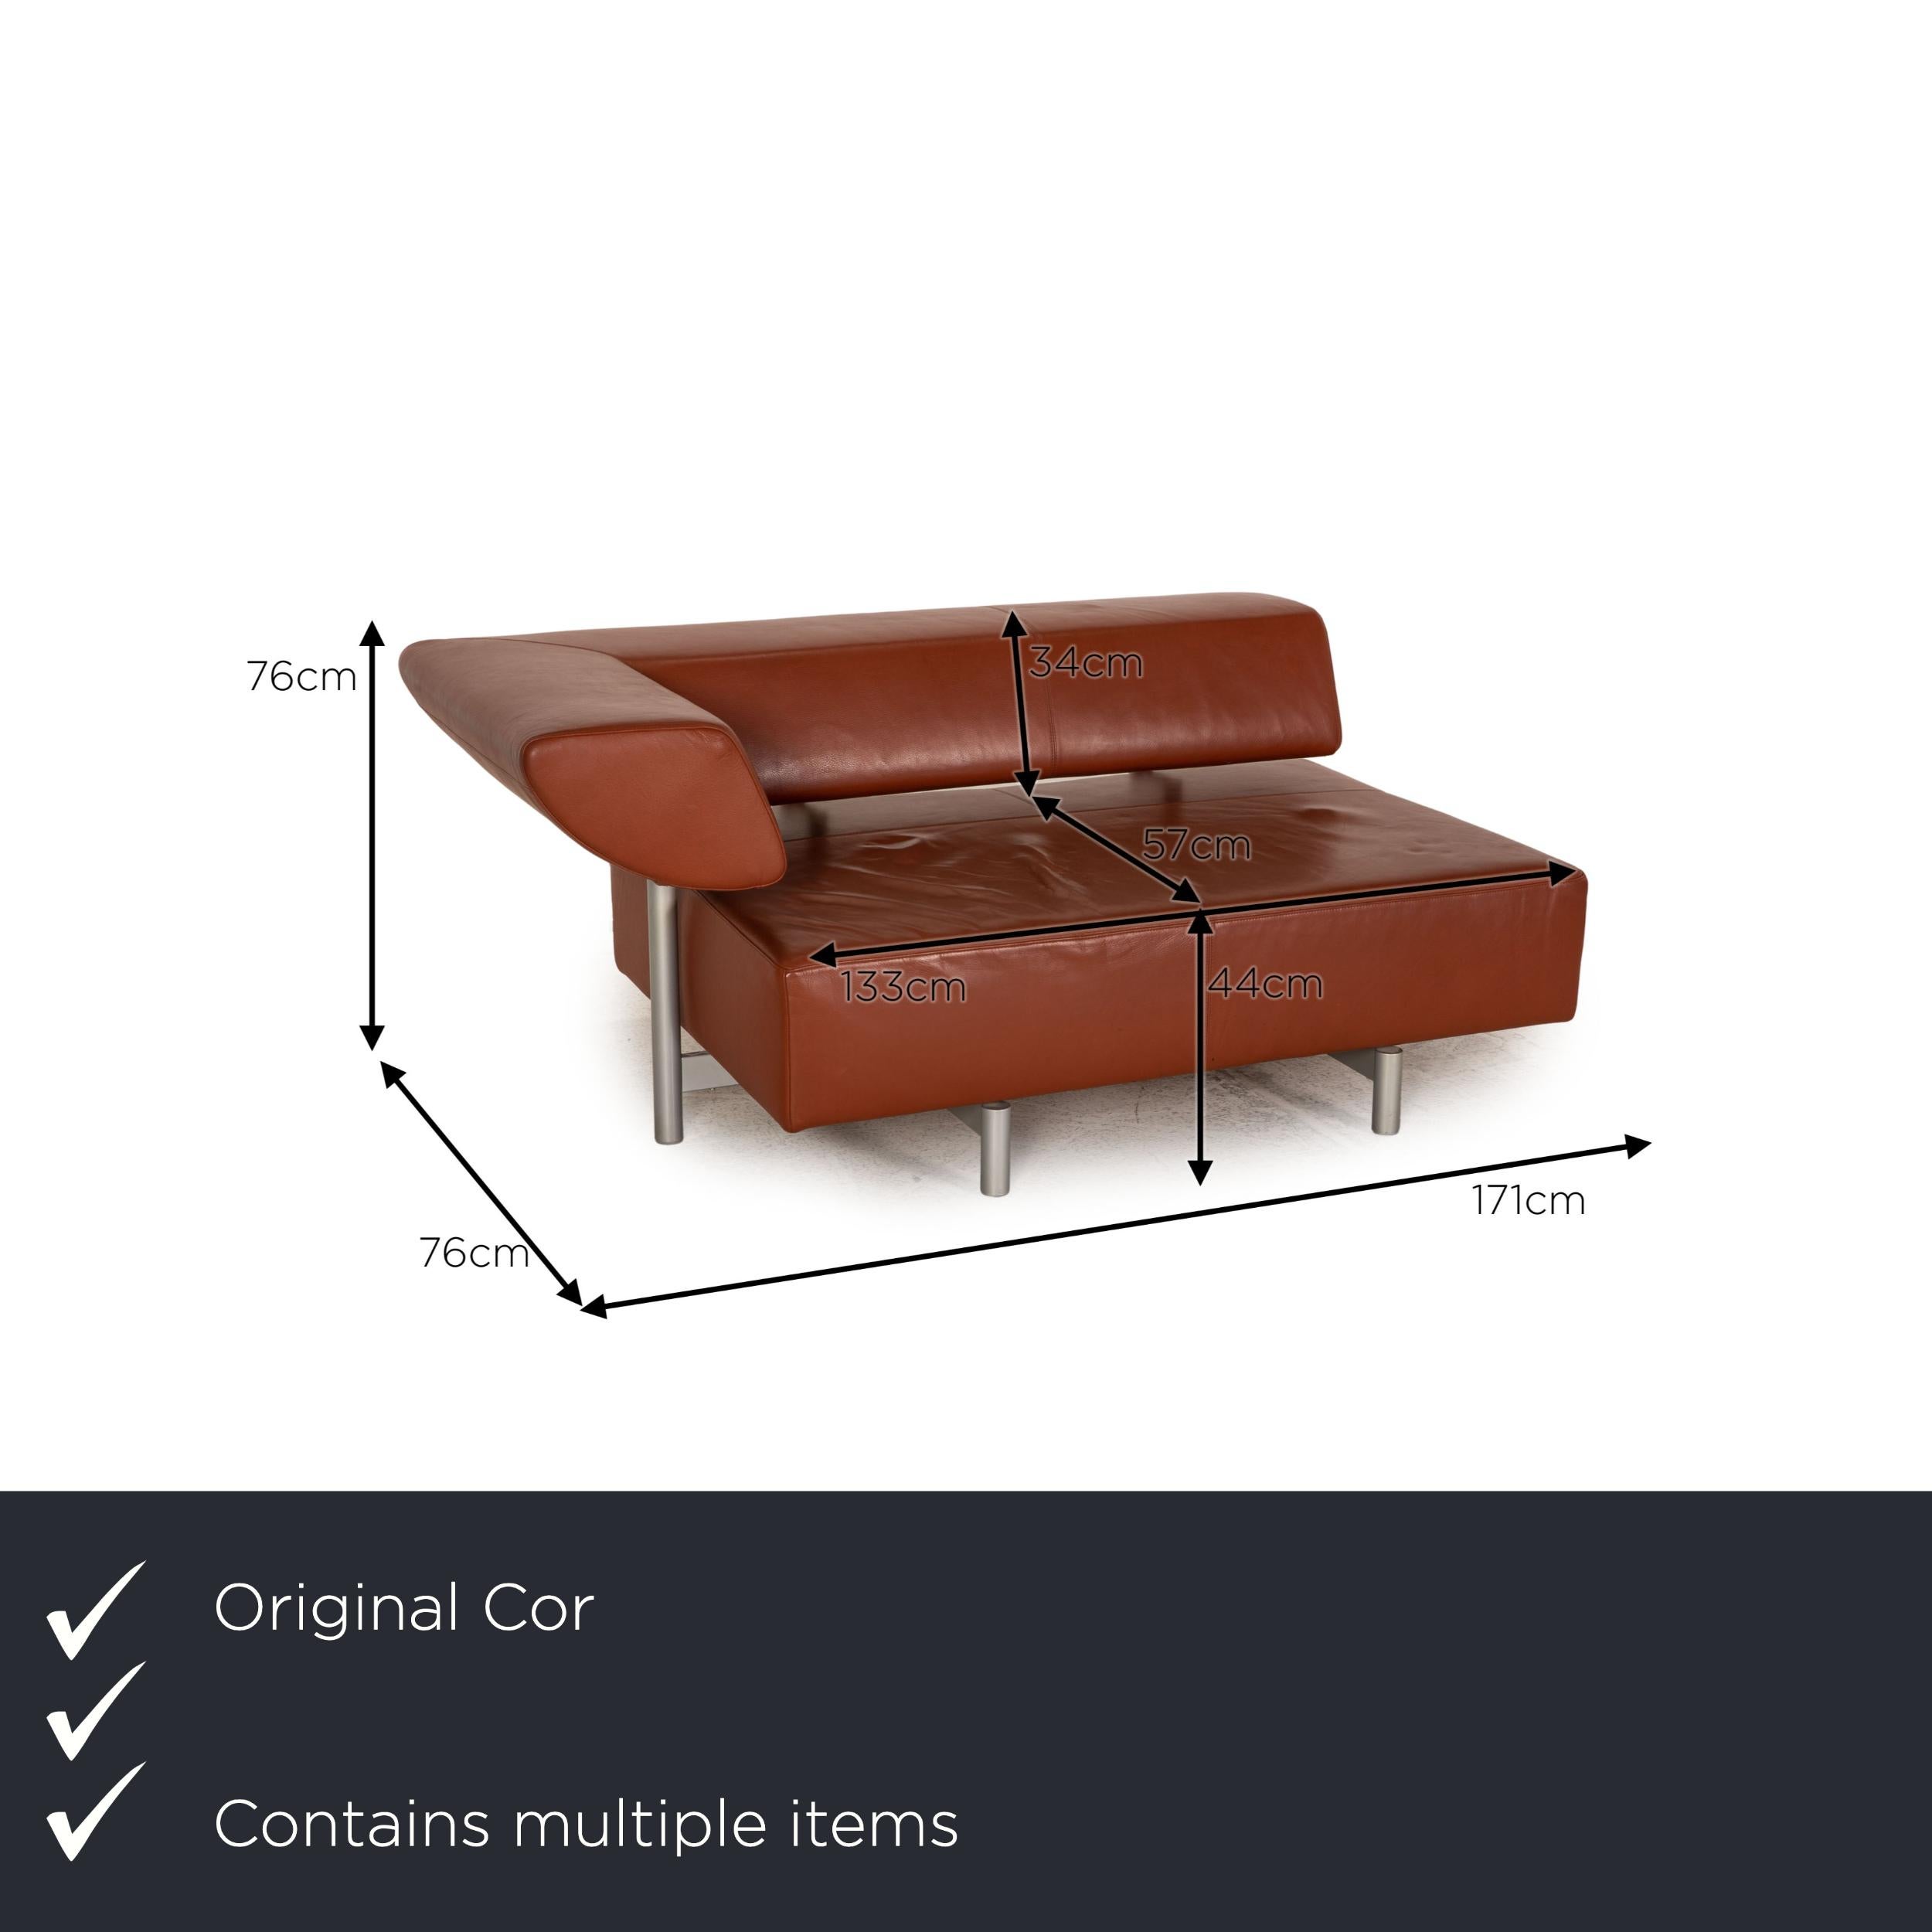 We present to you a COR Arthe leather sofa set brown 2x two-seater couch.

Product measurements in centimeters:

depth: 96
width: 171
height: 76
seat height: 44
rest height: 76
seat depth: 57
seat width: 133
back height: 34.

 